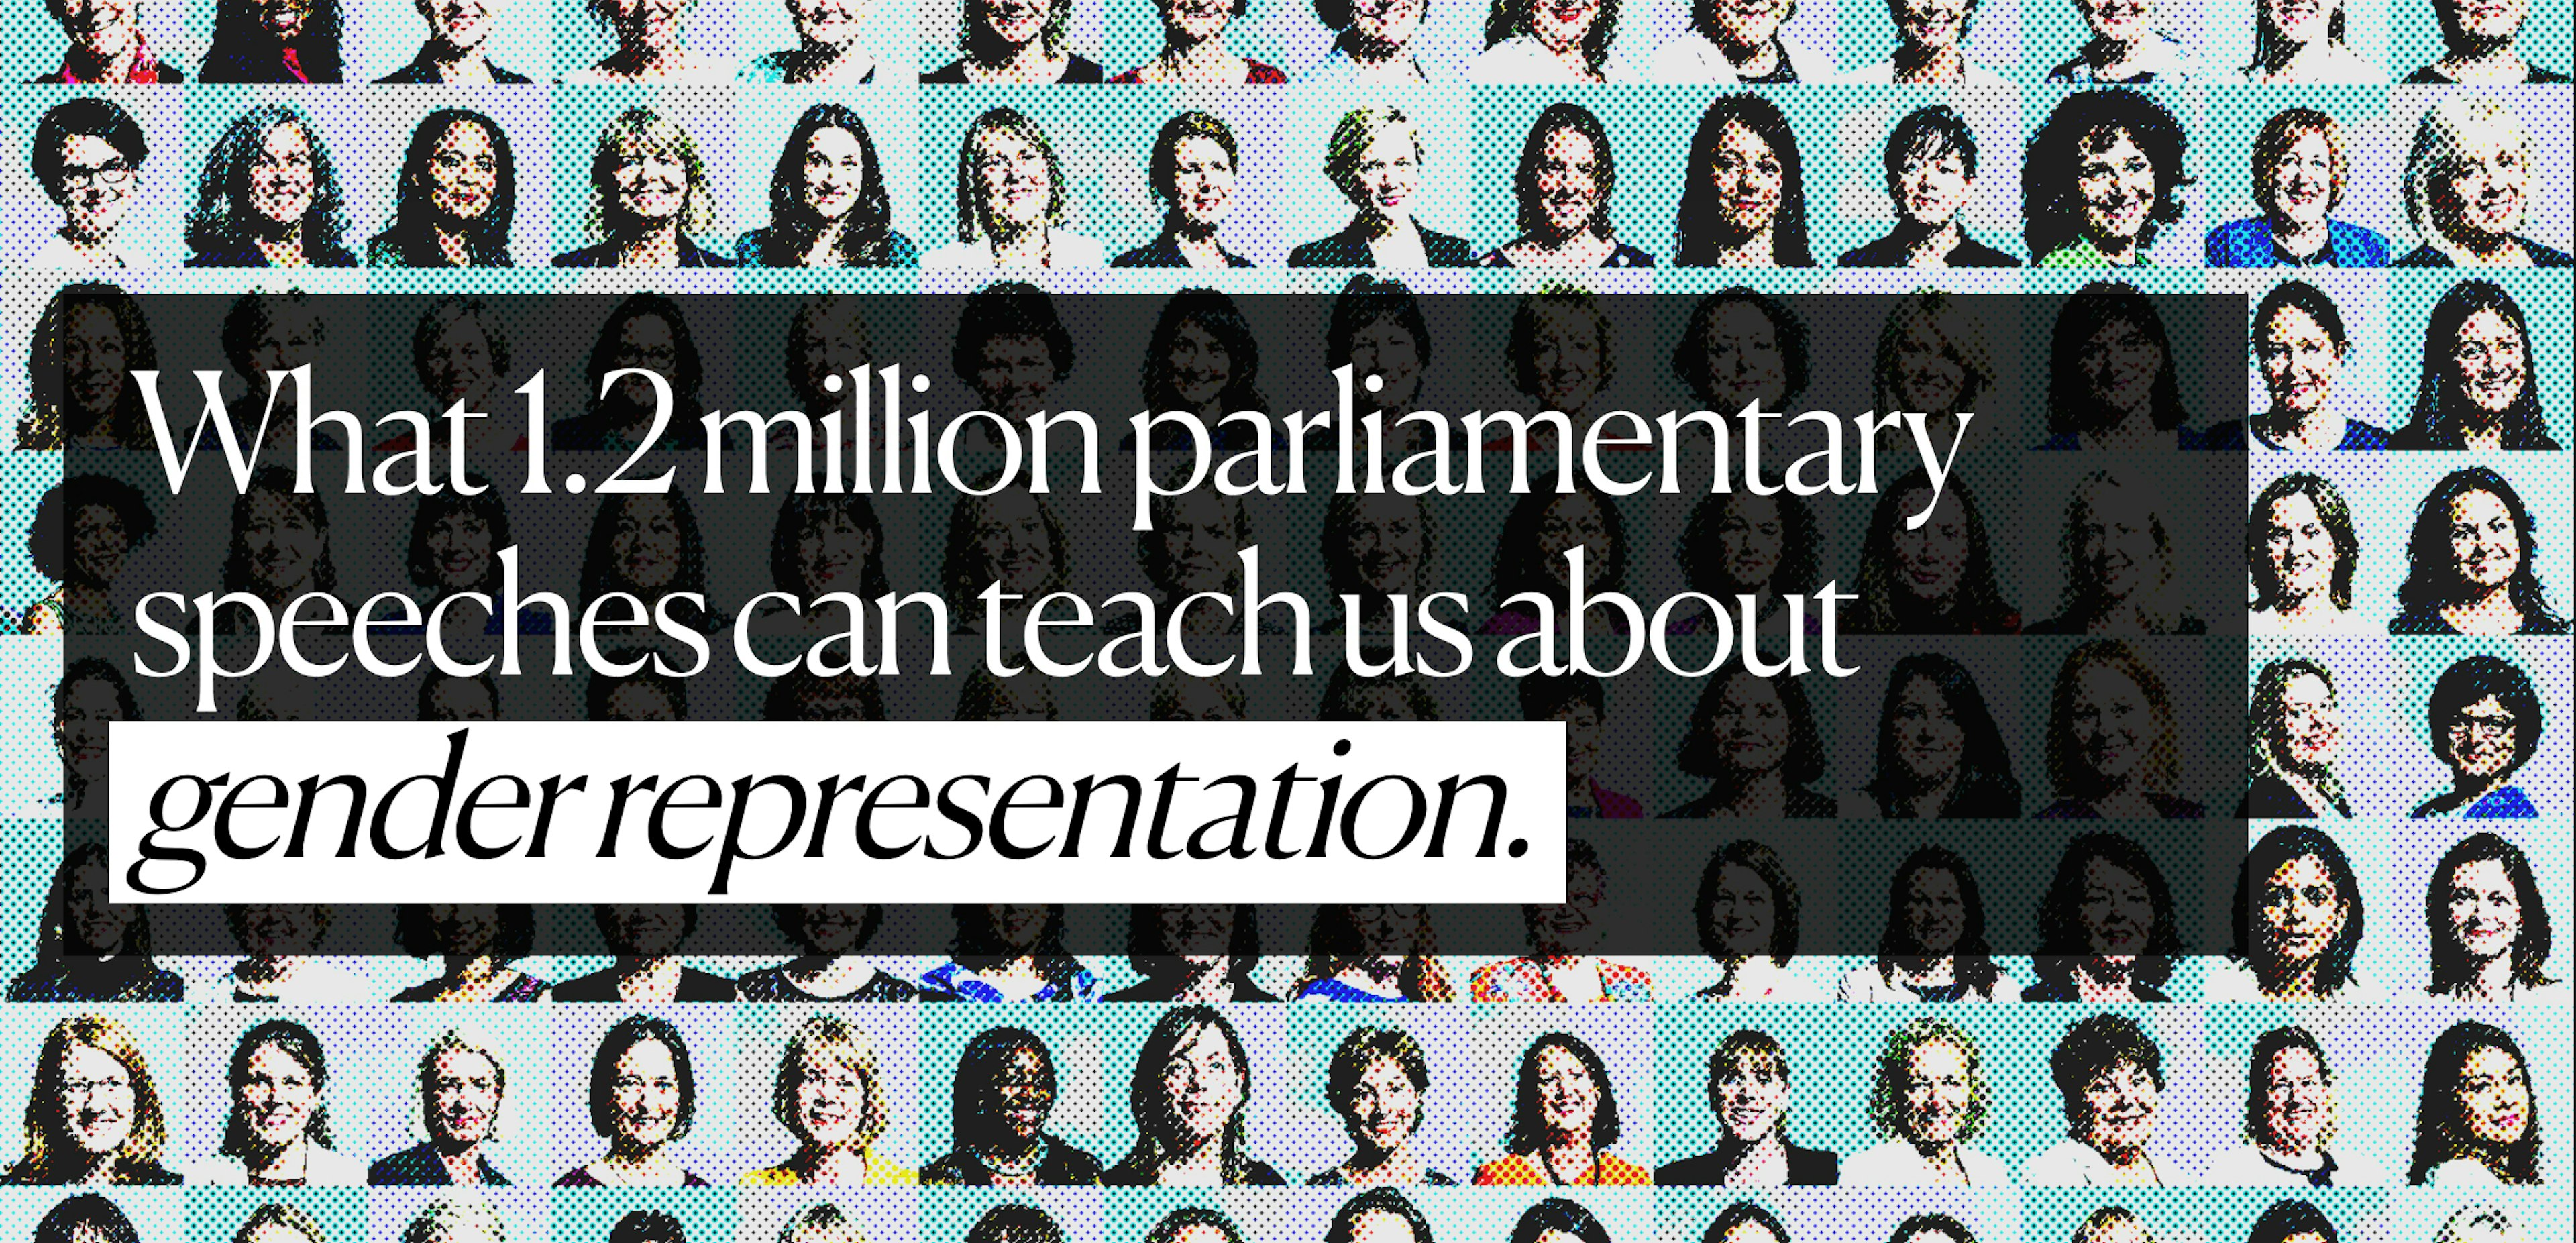 What 1.2 million parliamentary speeches can teach us about gender representation